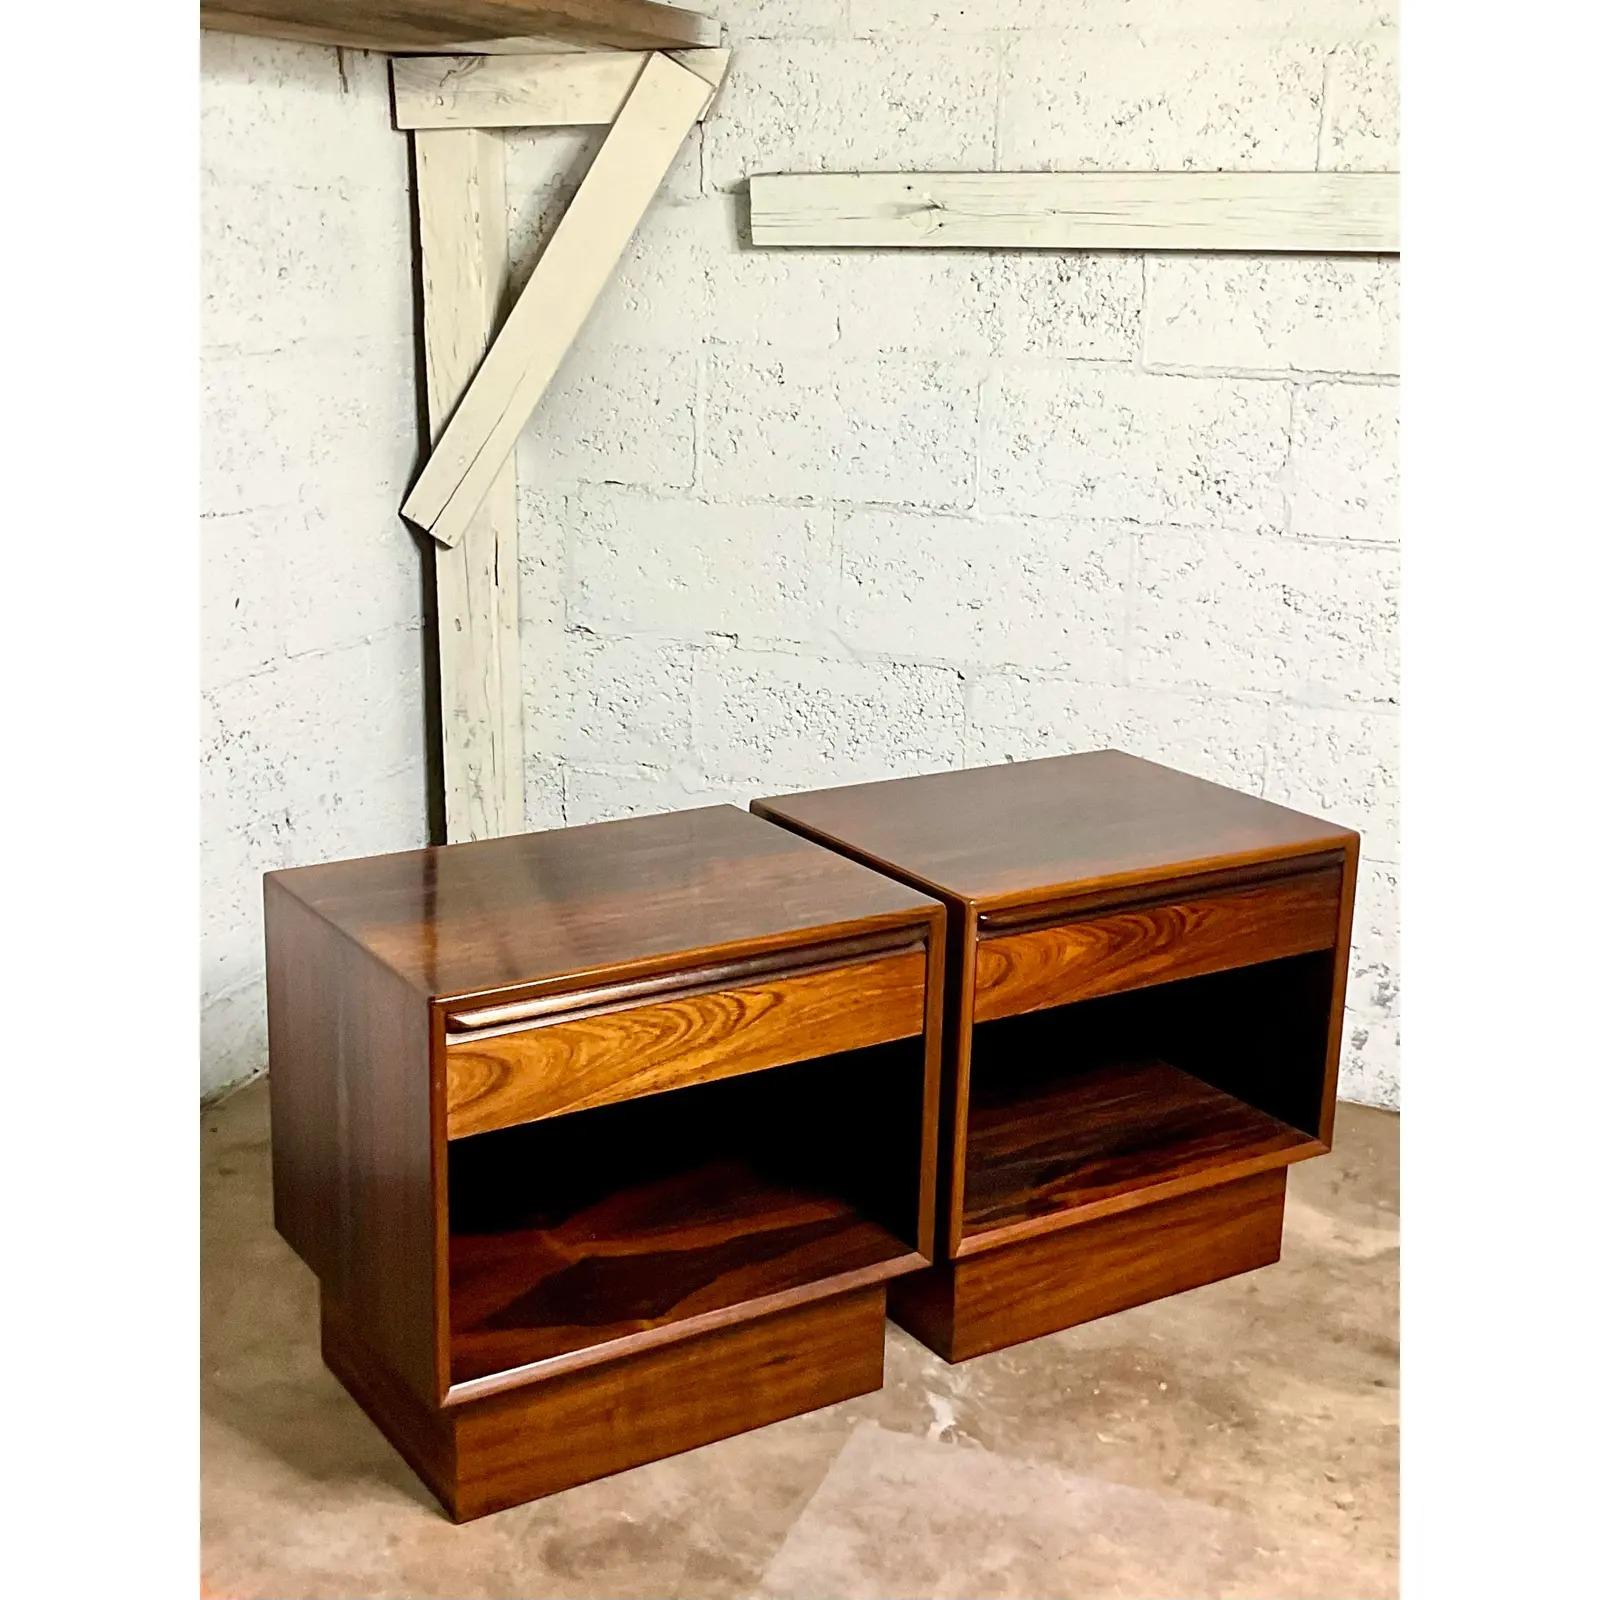 Fantastic pair of vintage MCM nightstands. Made by the iconic Westnofa group in Norway. Incredible wood grain detail and in immaculate condition. Matching dresser also available. Acquired from a Palm Beach estate.